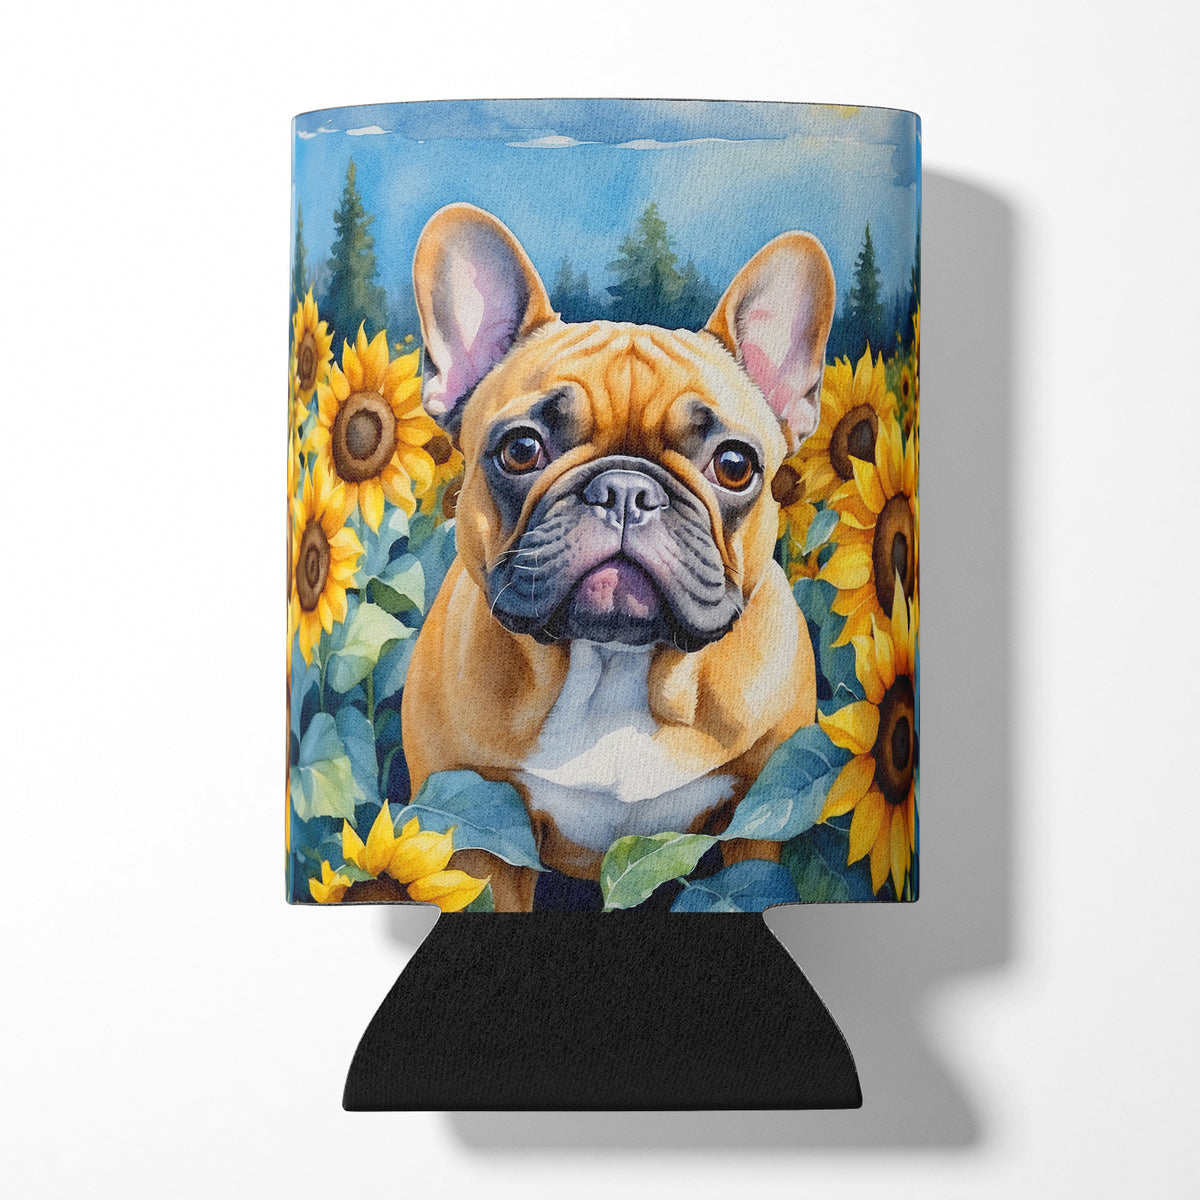 Buy this French Bulldog in Sunflowers Can or Bottle Hugger